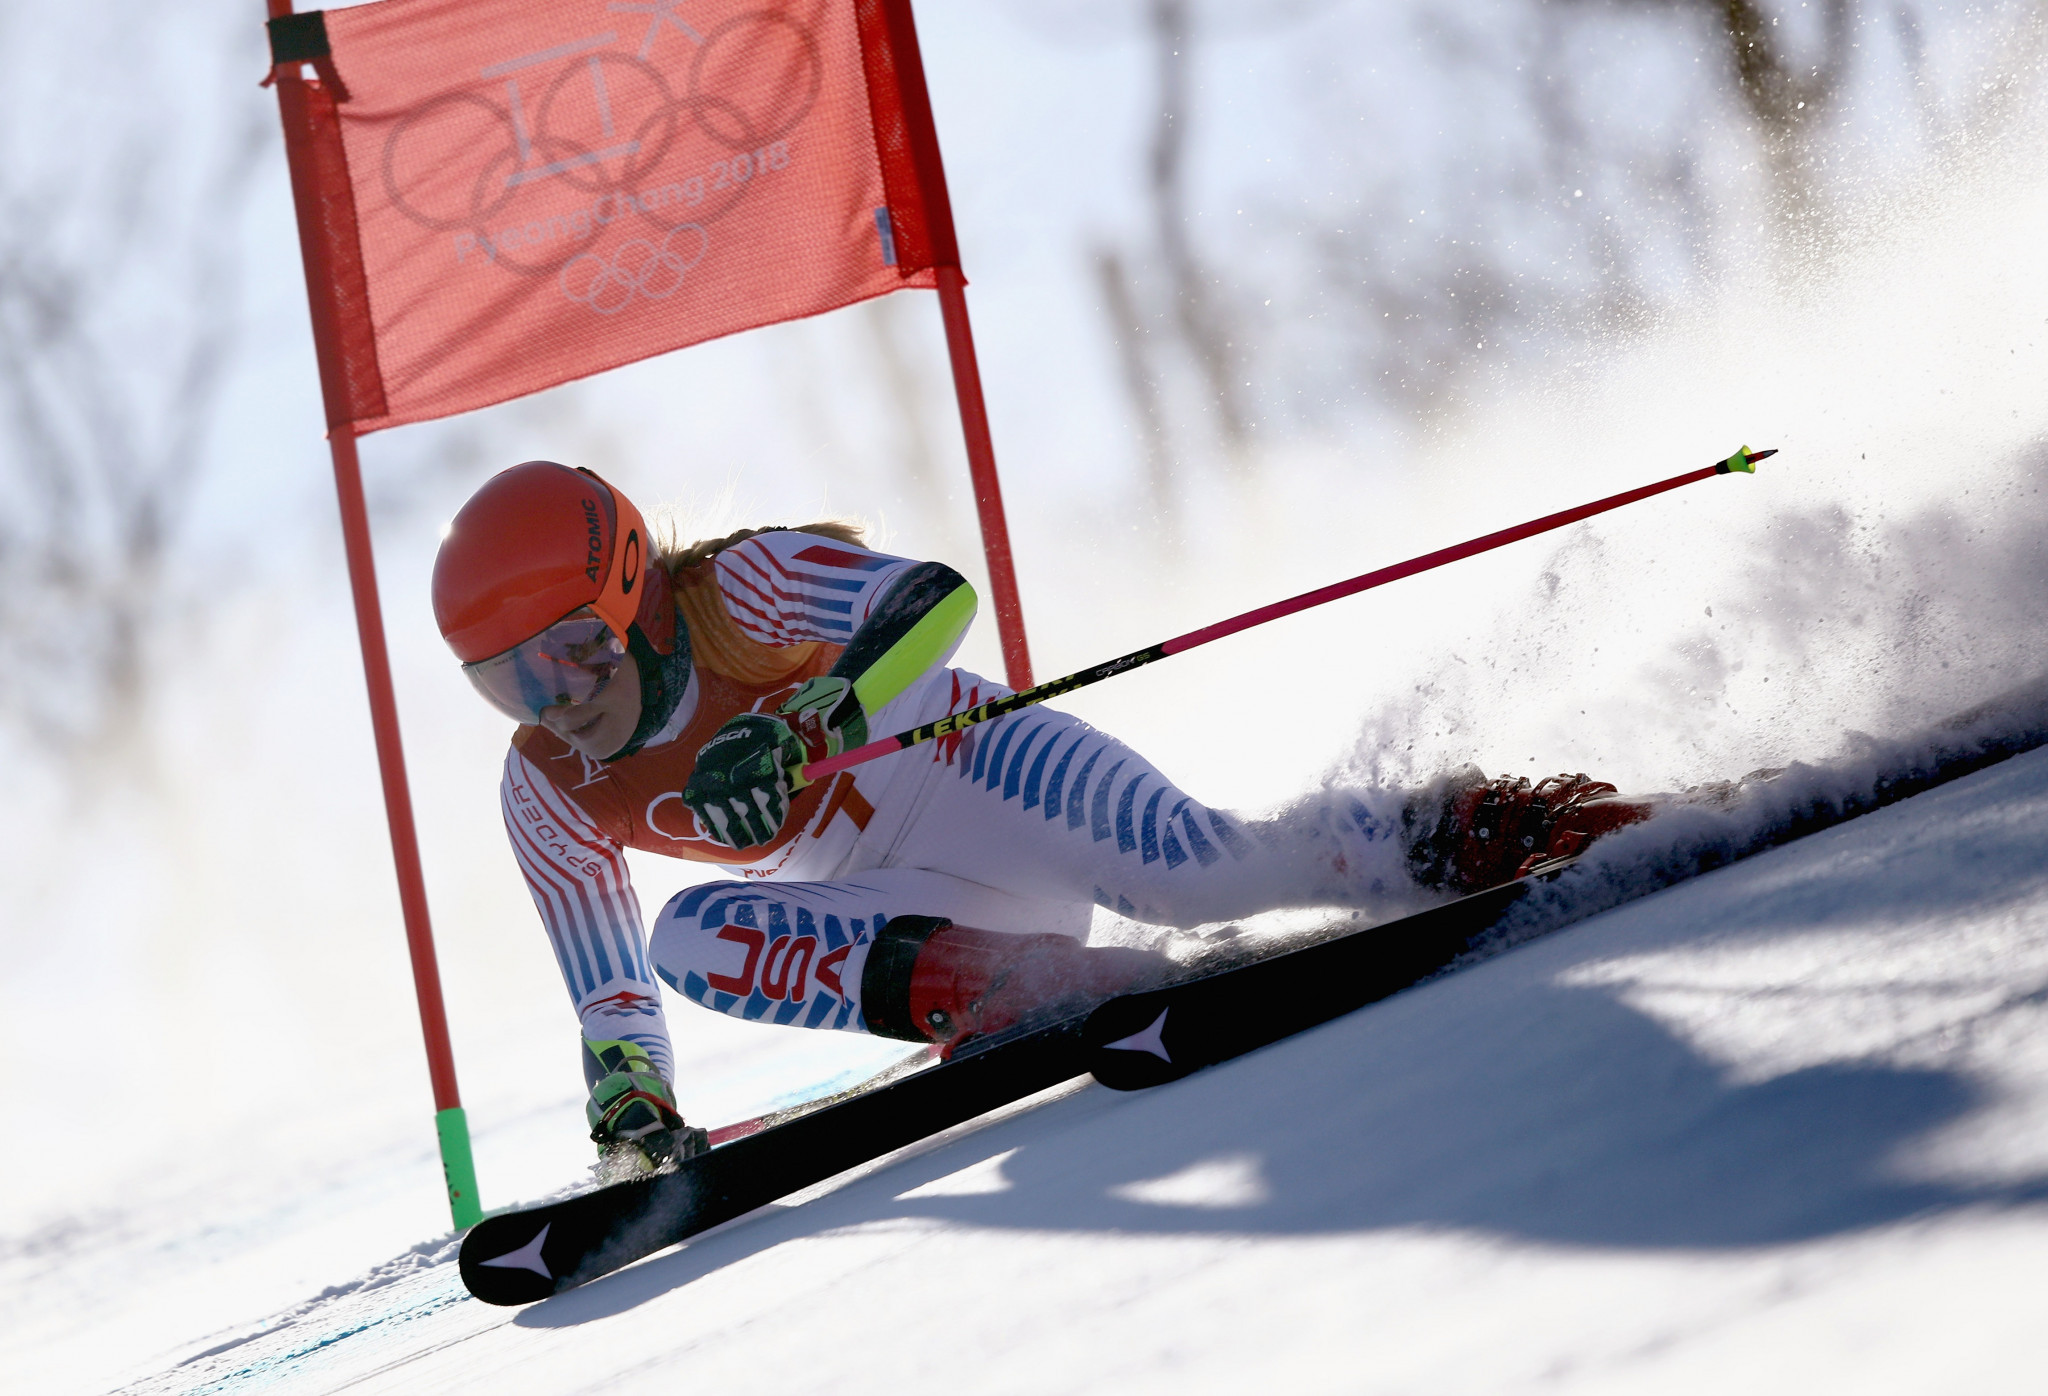 American star Mikaela Shiffrin pulled out all the stops and laid down a blistering second run to secure the women's giant slalom gold medal ©Getty Images